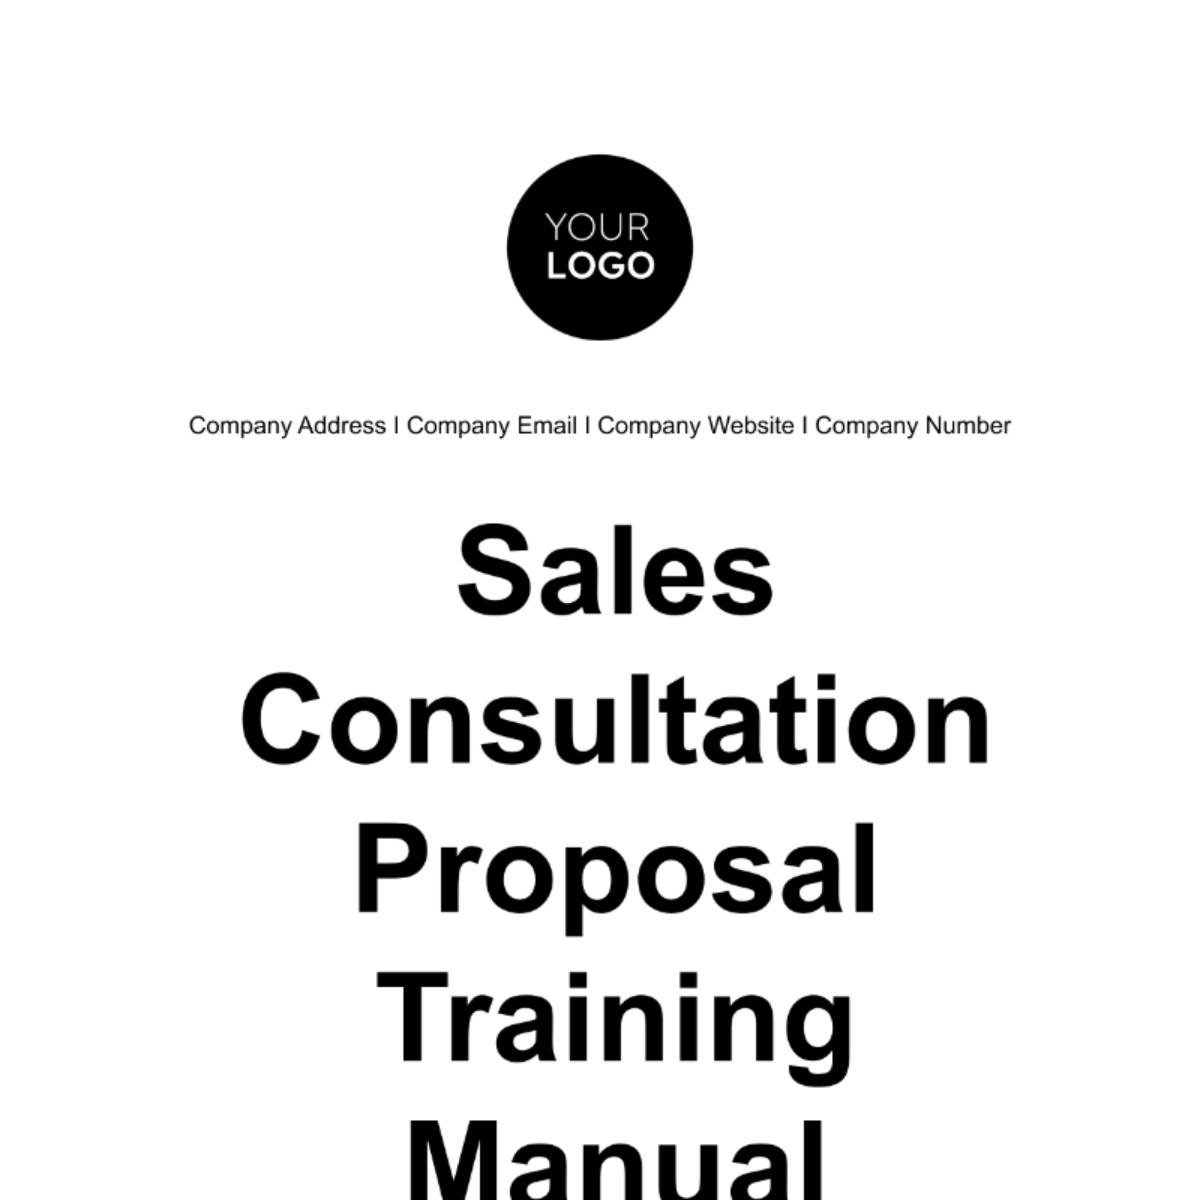 Free Sales Consultation Proposal Training Manual Template